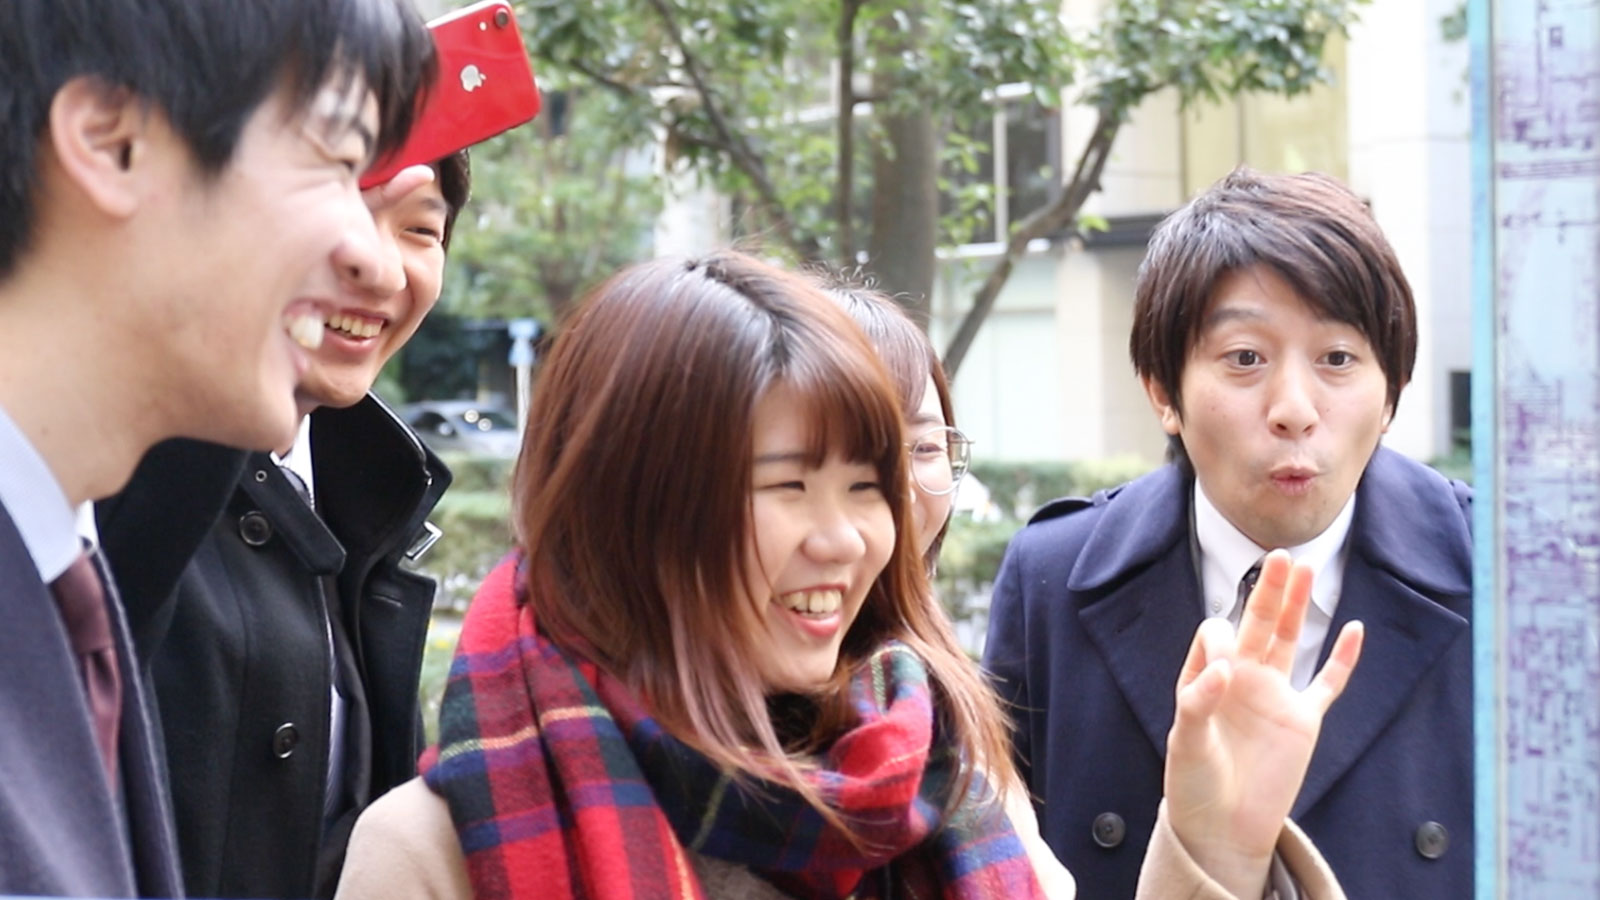 Japanese group interacting with digital ooh screen